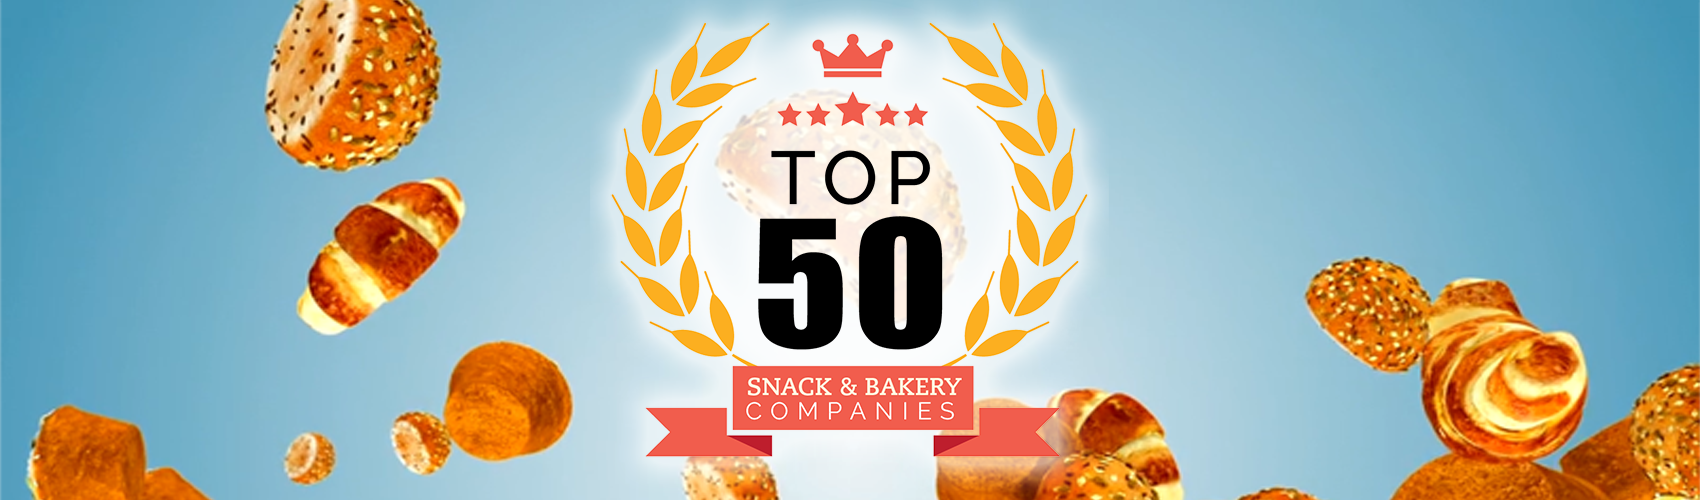 The Top 50 Snack & Bakery Companies of 2021